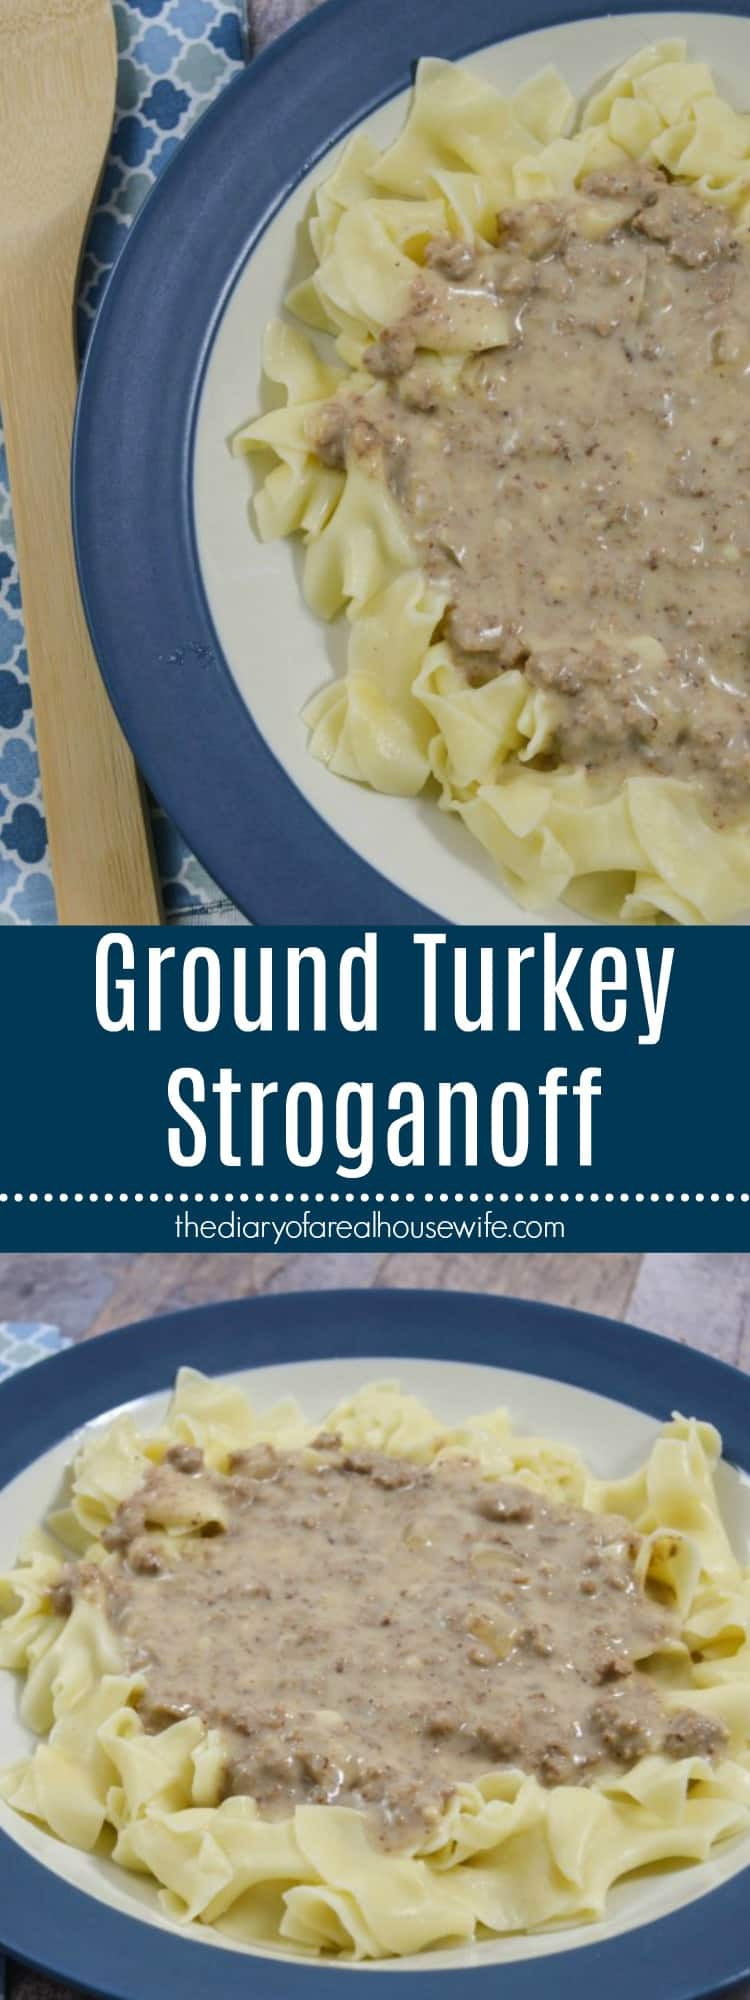 Ground Turkey Stroganoff
 Ground Turkey Stroganoff Recipe The Diary of a Real